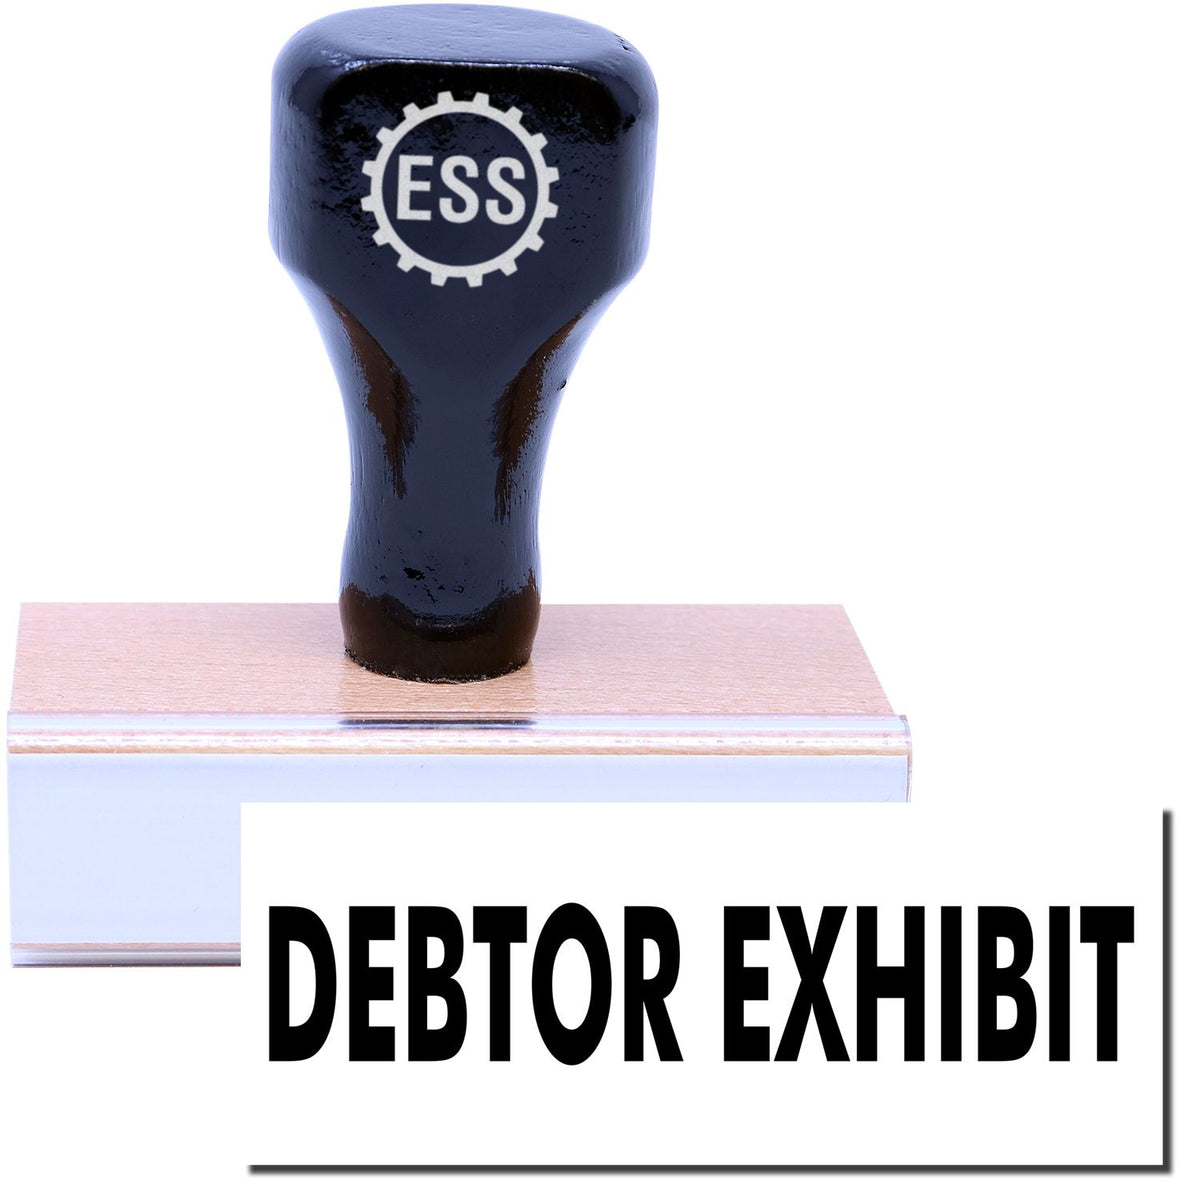 A stock office rubber stamp with a stamped image showing how the text &quot;DEBTOR EXHIBIT&quot; is displayed after stamping.